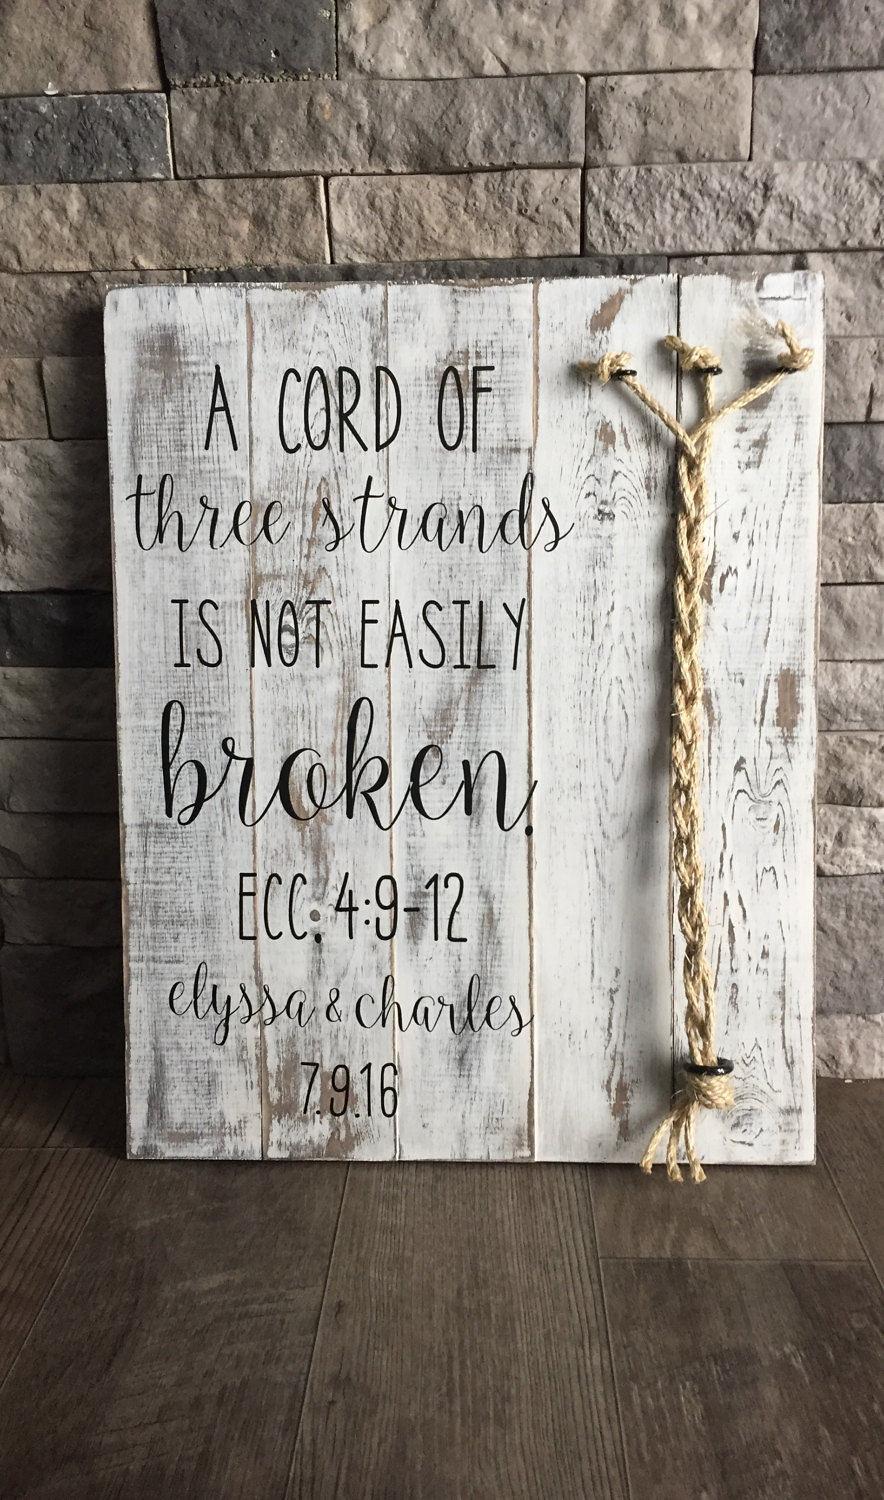 Свадьба - A Cord Of Three Strands Sign, A Cord of 3 Strands, Ecclesiastes 4:9-12, Wedding Ceremony Sign, Unity Ceremony Sign, Rustic Wedding Gift